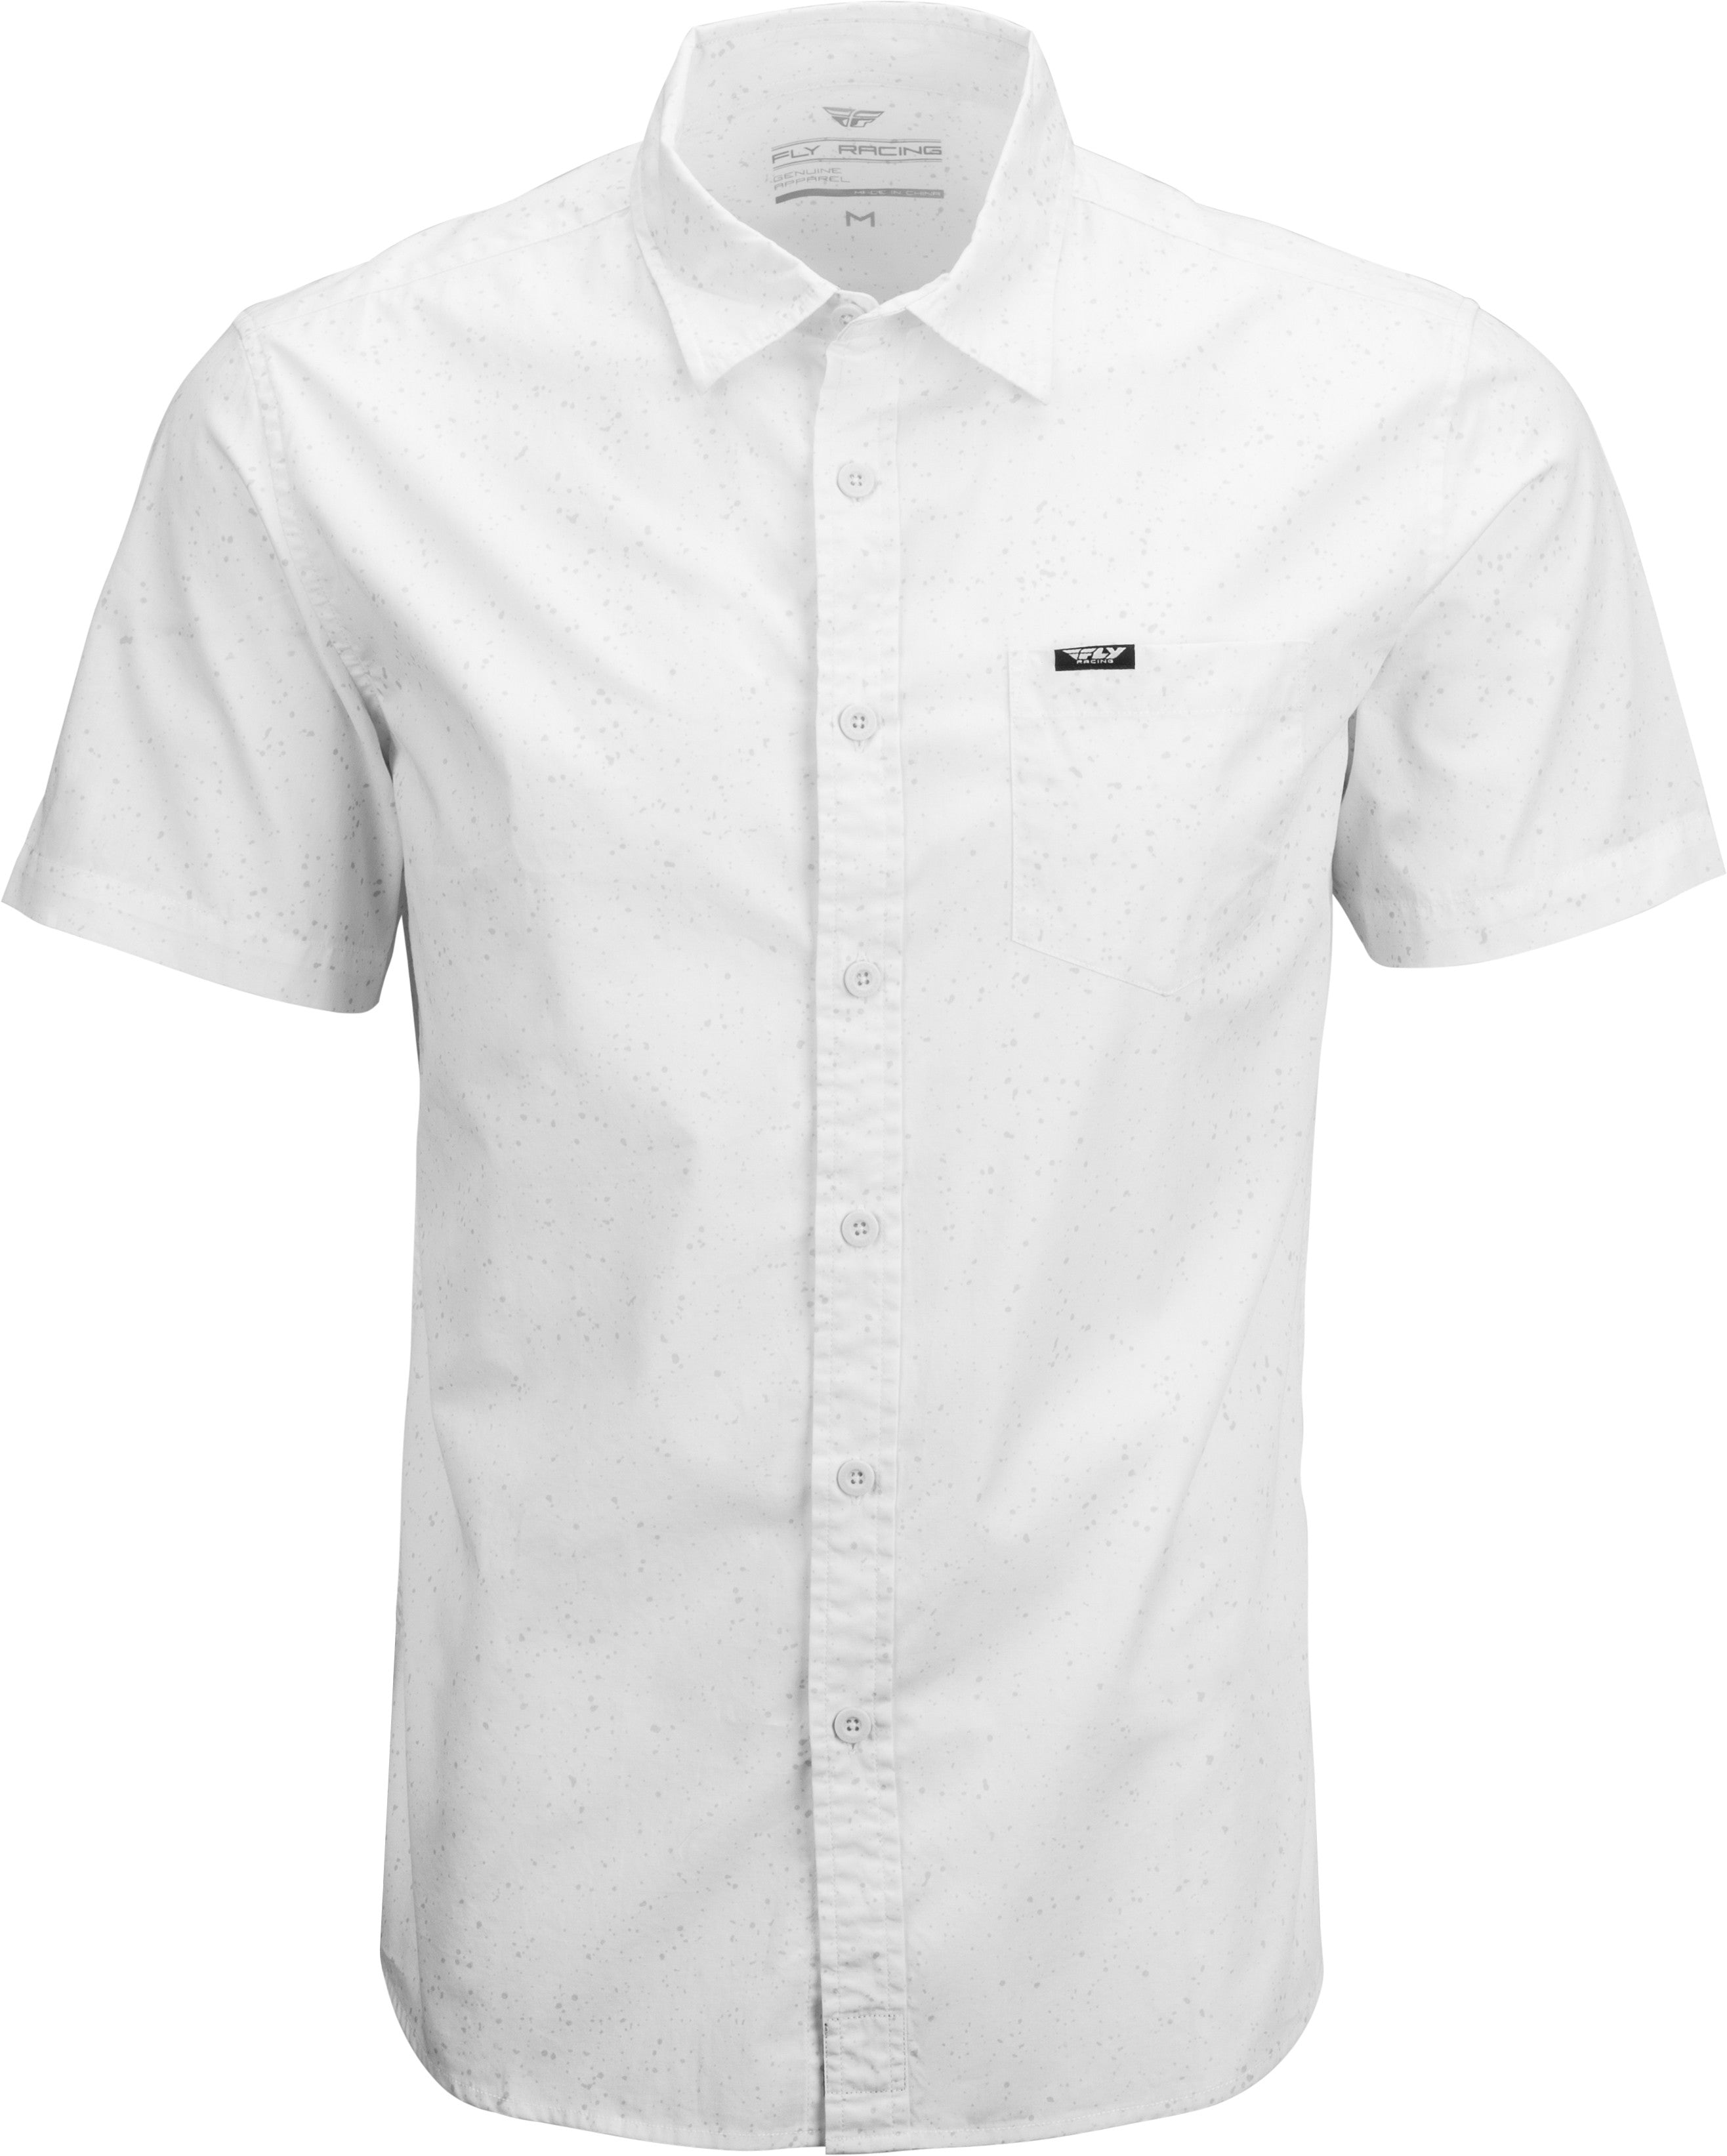 Fly Racing Button Up Shirt White 2X-Large 352-62052X